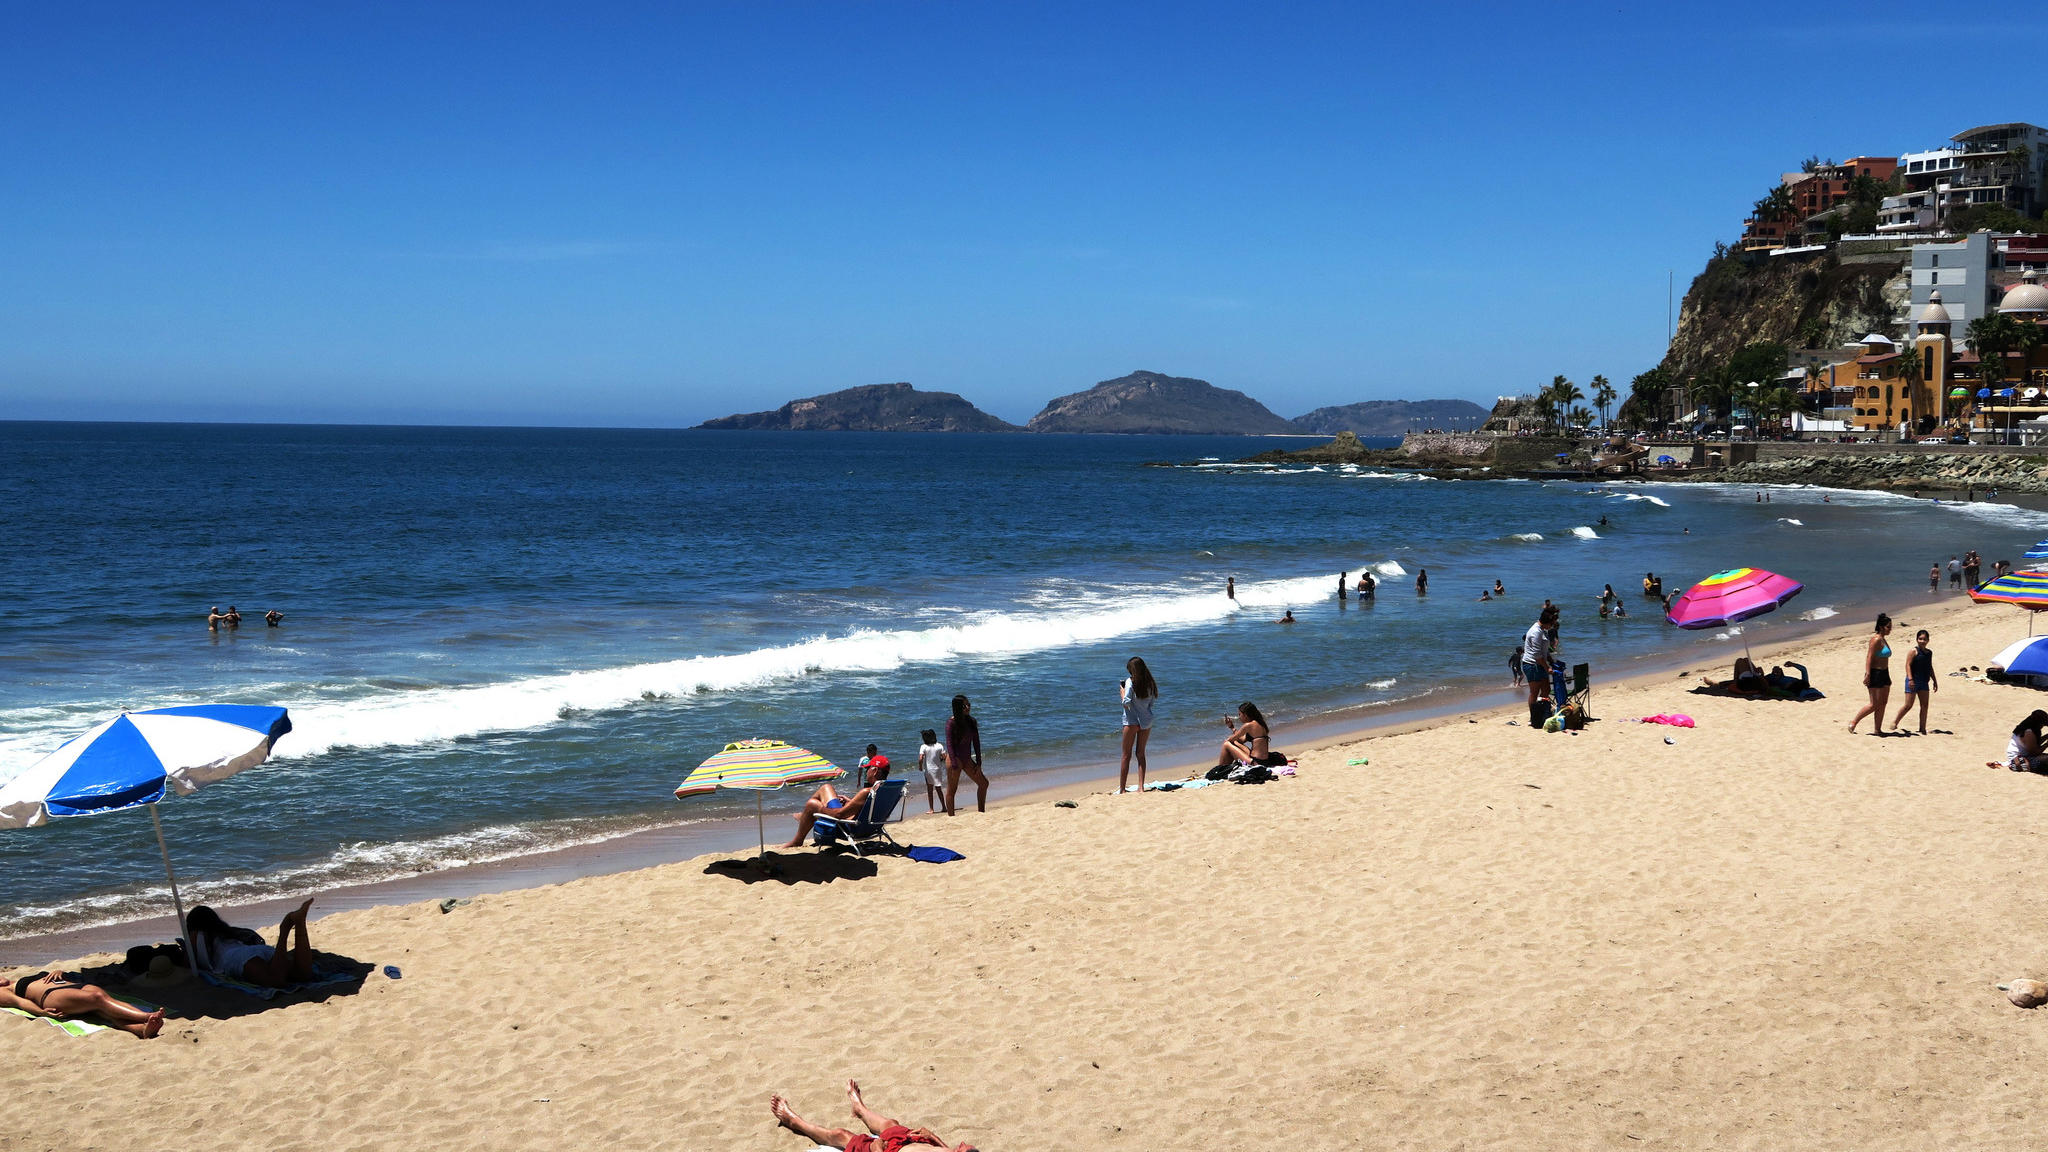 Nature and culture mix to make Mazatlan an undiscovered gem